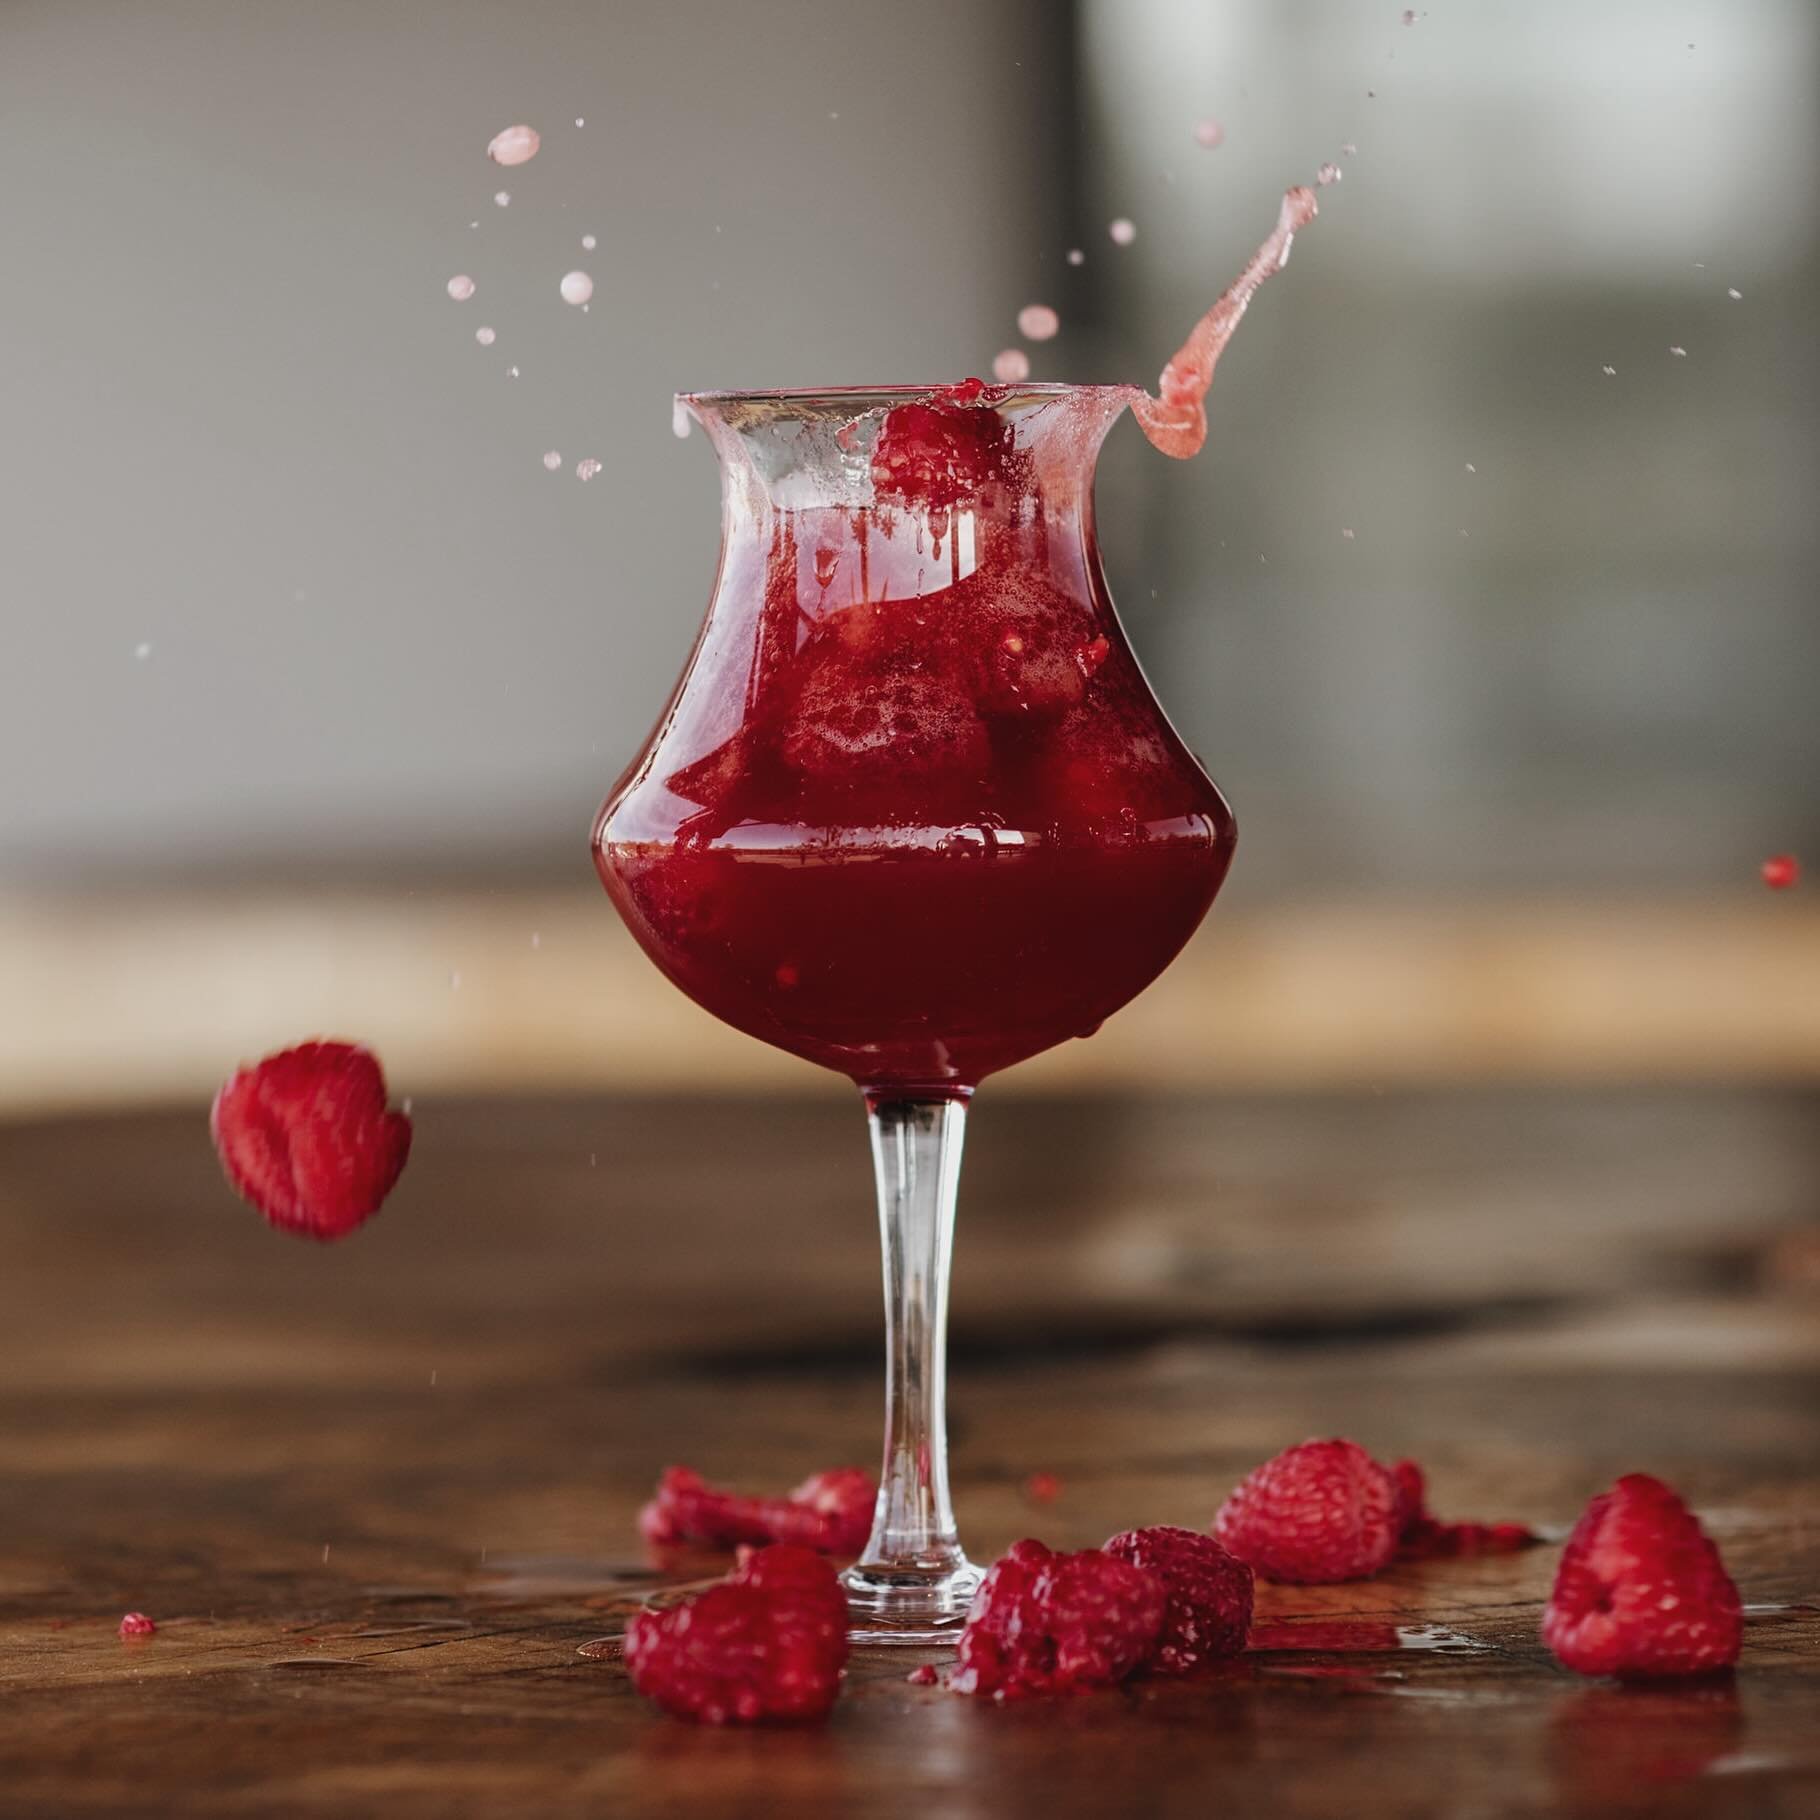 Many raspberries were harmed in the making of this beer&hellip;Our killer raspberry sour is made with nothing but real raspberries&hellip;prob why it tastes as amazing as it does!

#dangerousales #beer #beers #sour #sourbeer #craftbeer #beerporn #bee